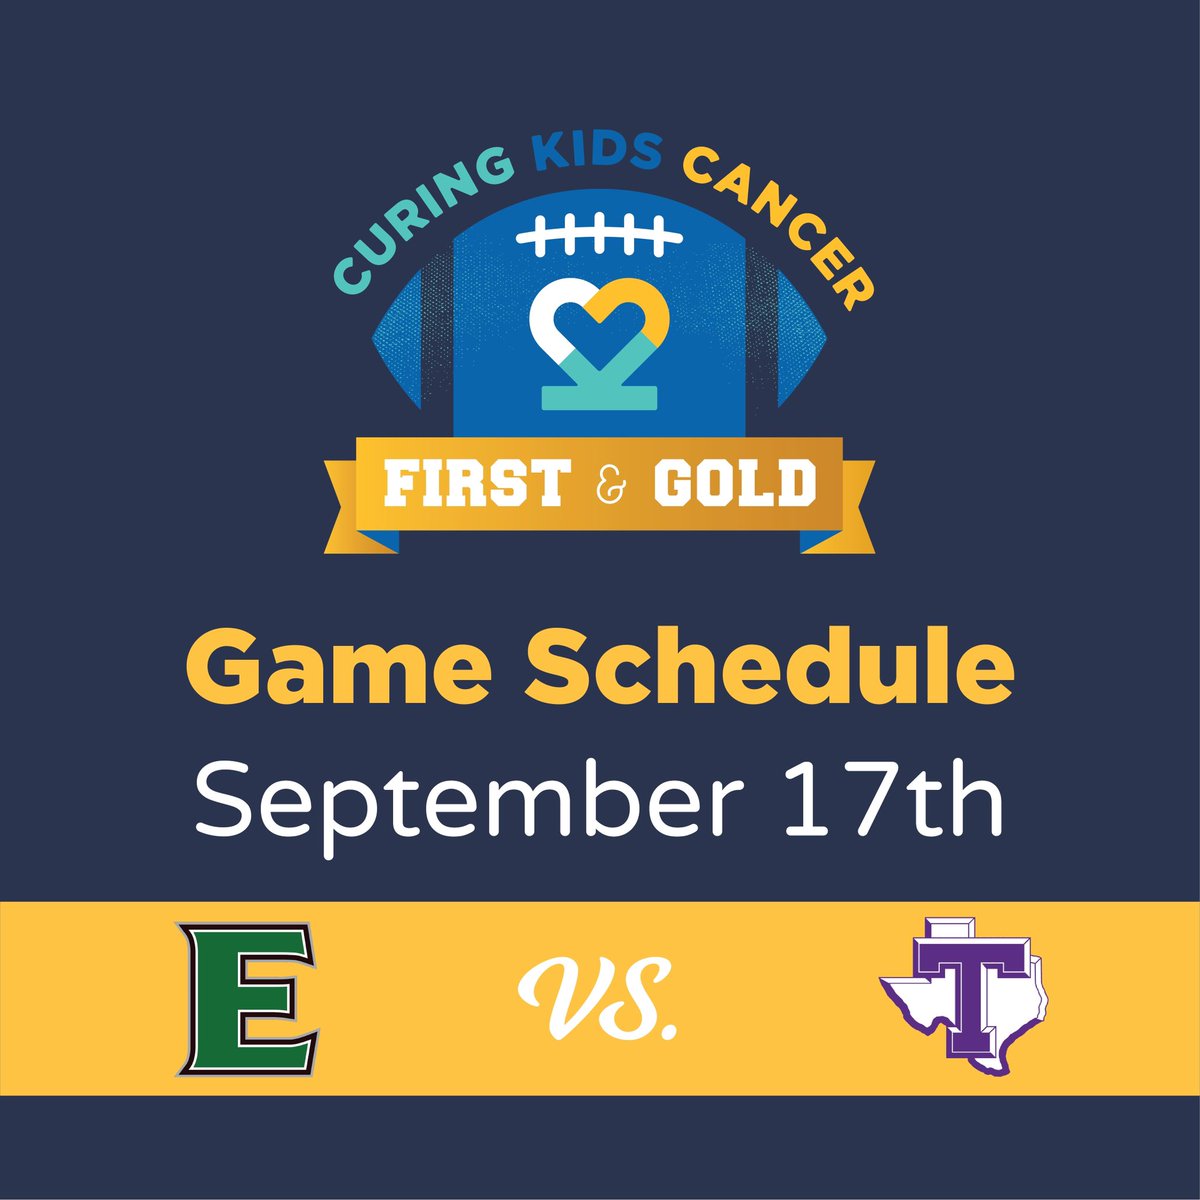 Today is the day: the first awareness game of the season! Join us in cheering on @TarletonFB as they Go Gold for Childhood Cancer Awareness Month 🎗️ #gogold #childhoodcancerawarenessmonth #septemberawareness #firstandgold #collegefootball #gameday #collegegameday